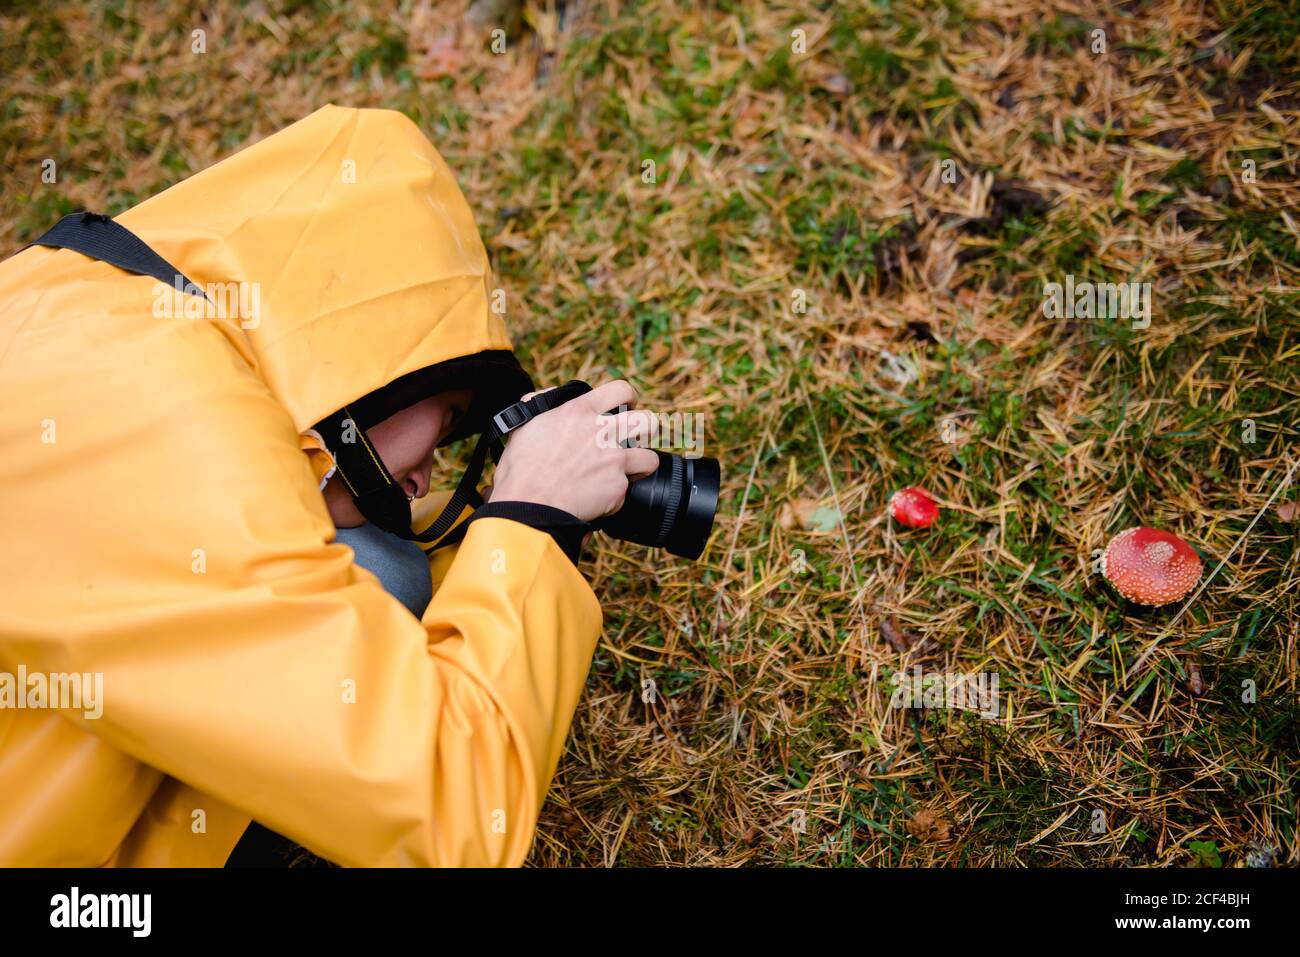 From above active person in yellow raincoat with hood taking photo of red amanita in grass in forest Stock Photo